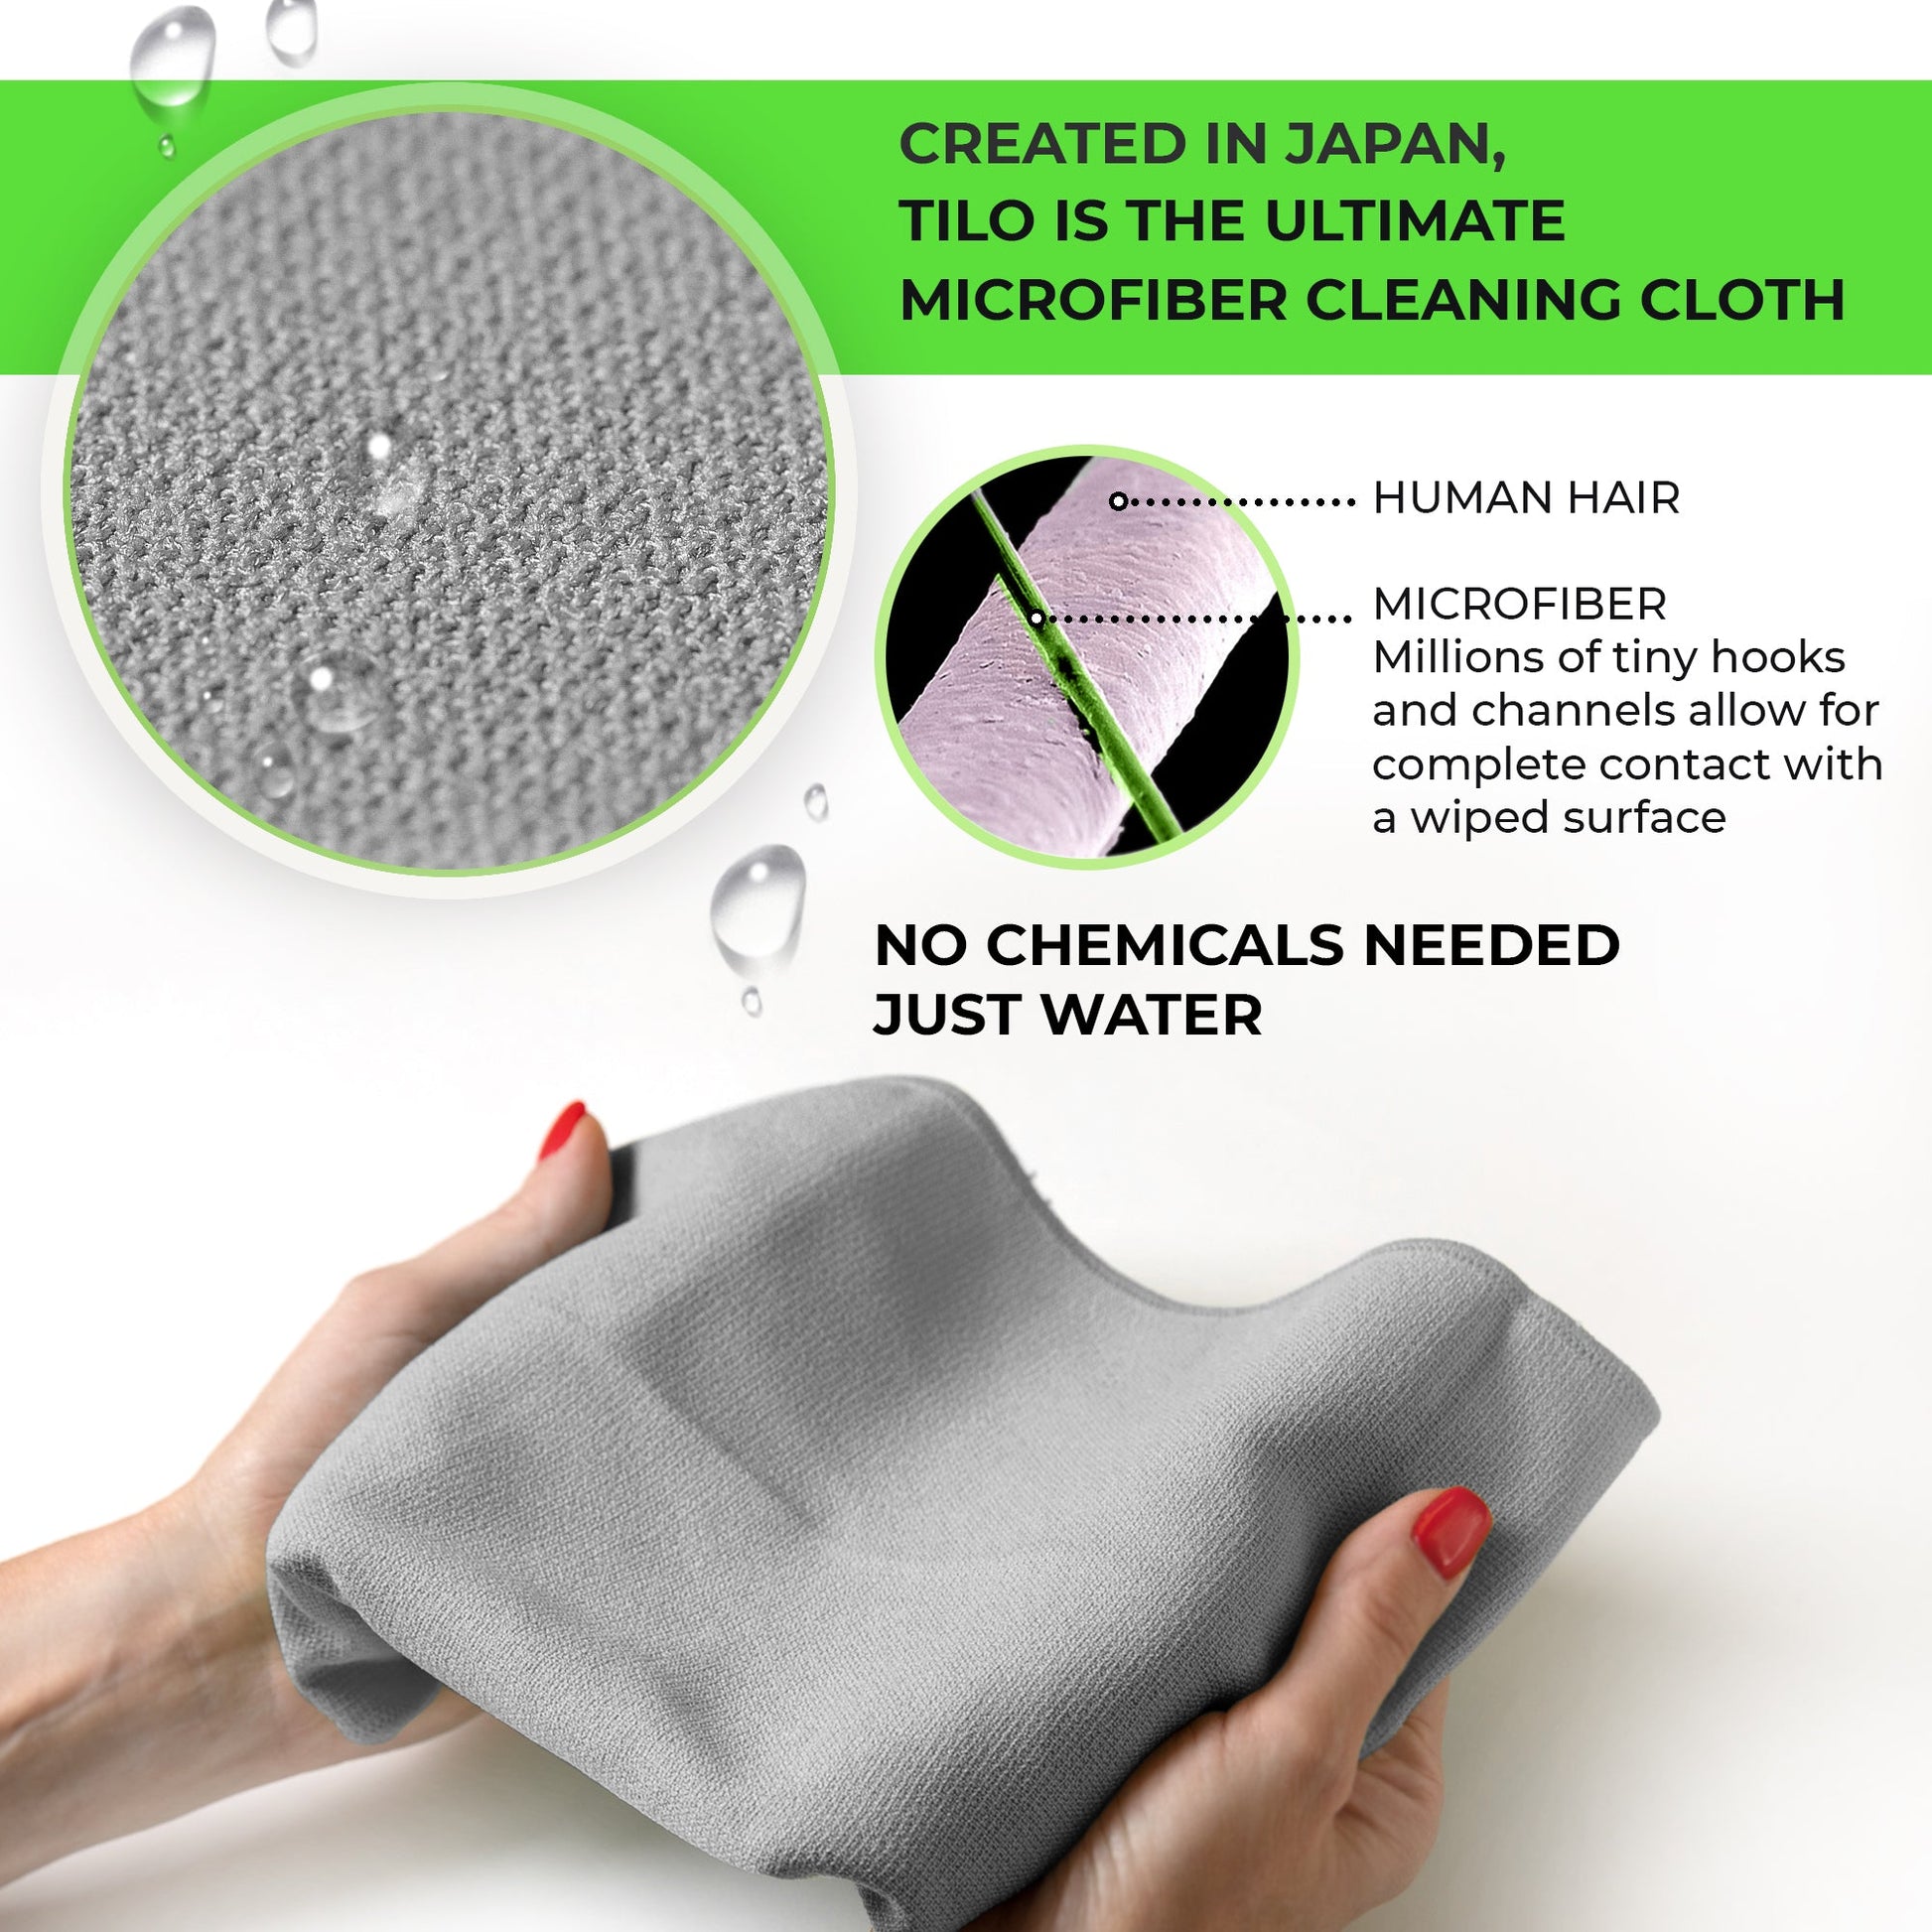 TiLO Microfiber Cleaning Cloth – 19.75 x 13-inch Reusable – Grey - TiLO The Ultimate